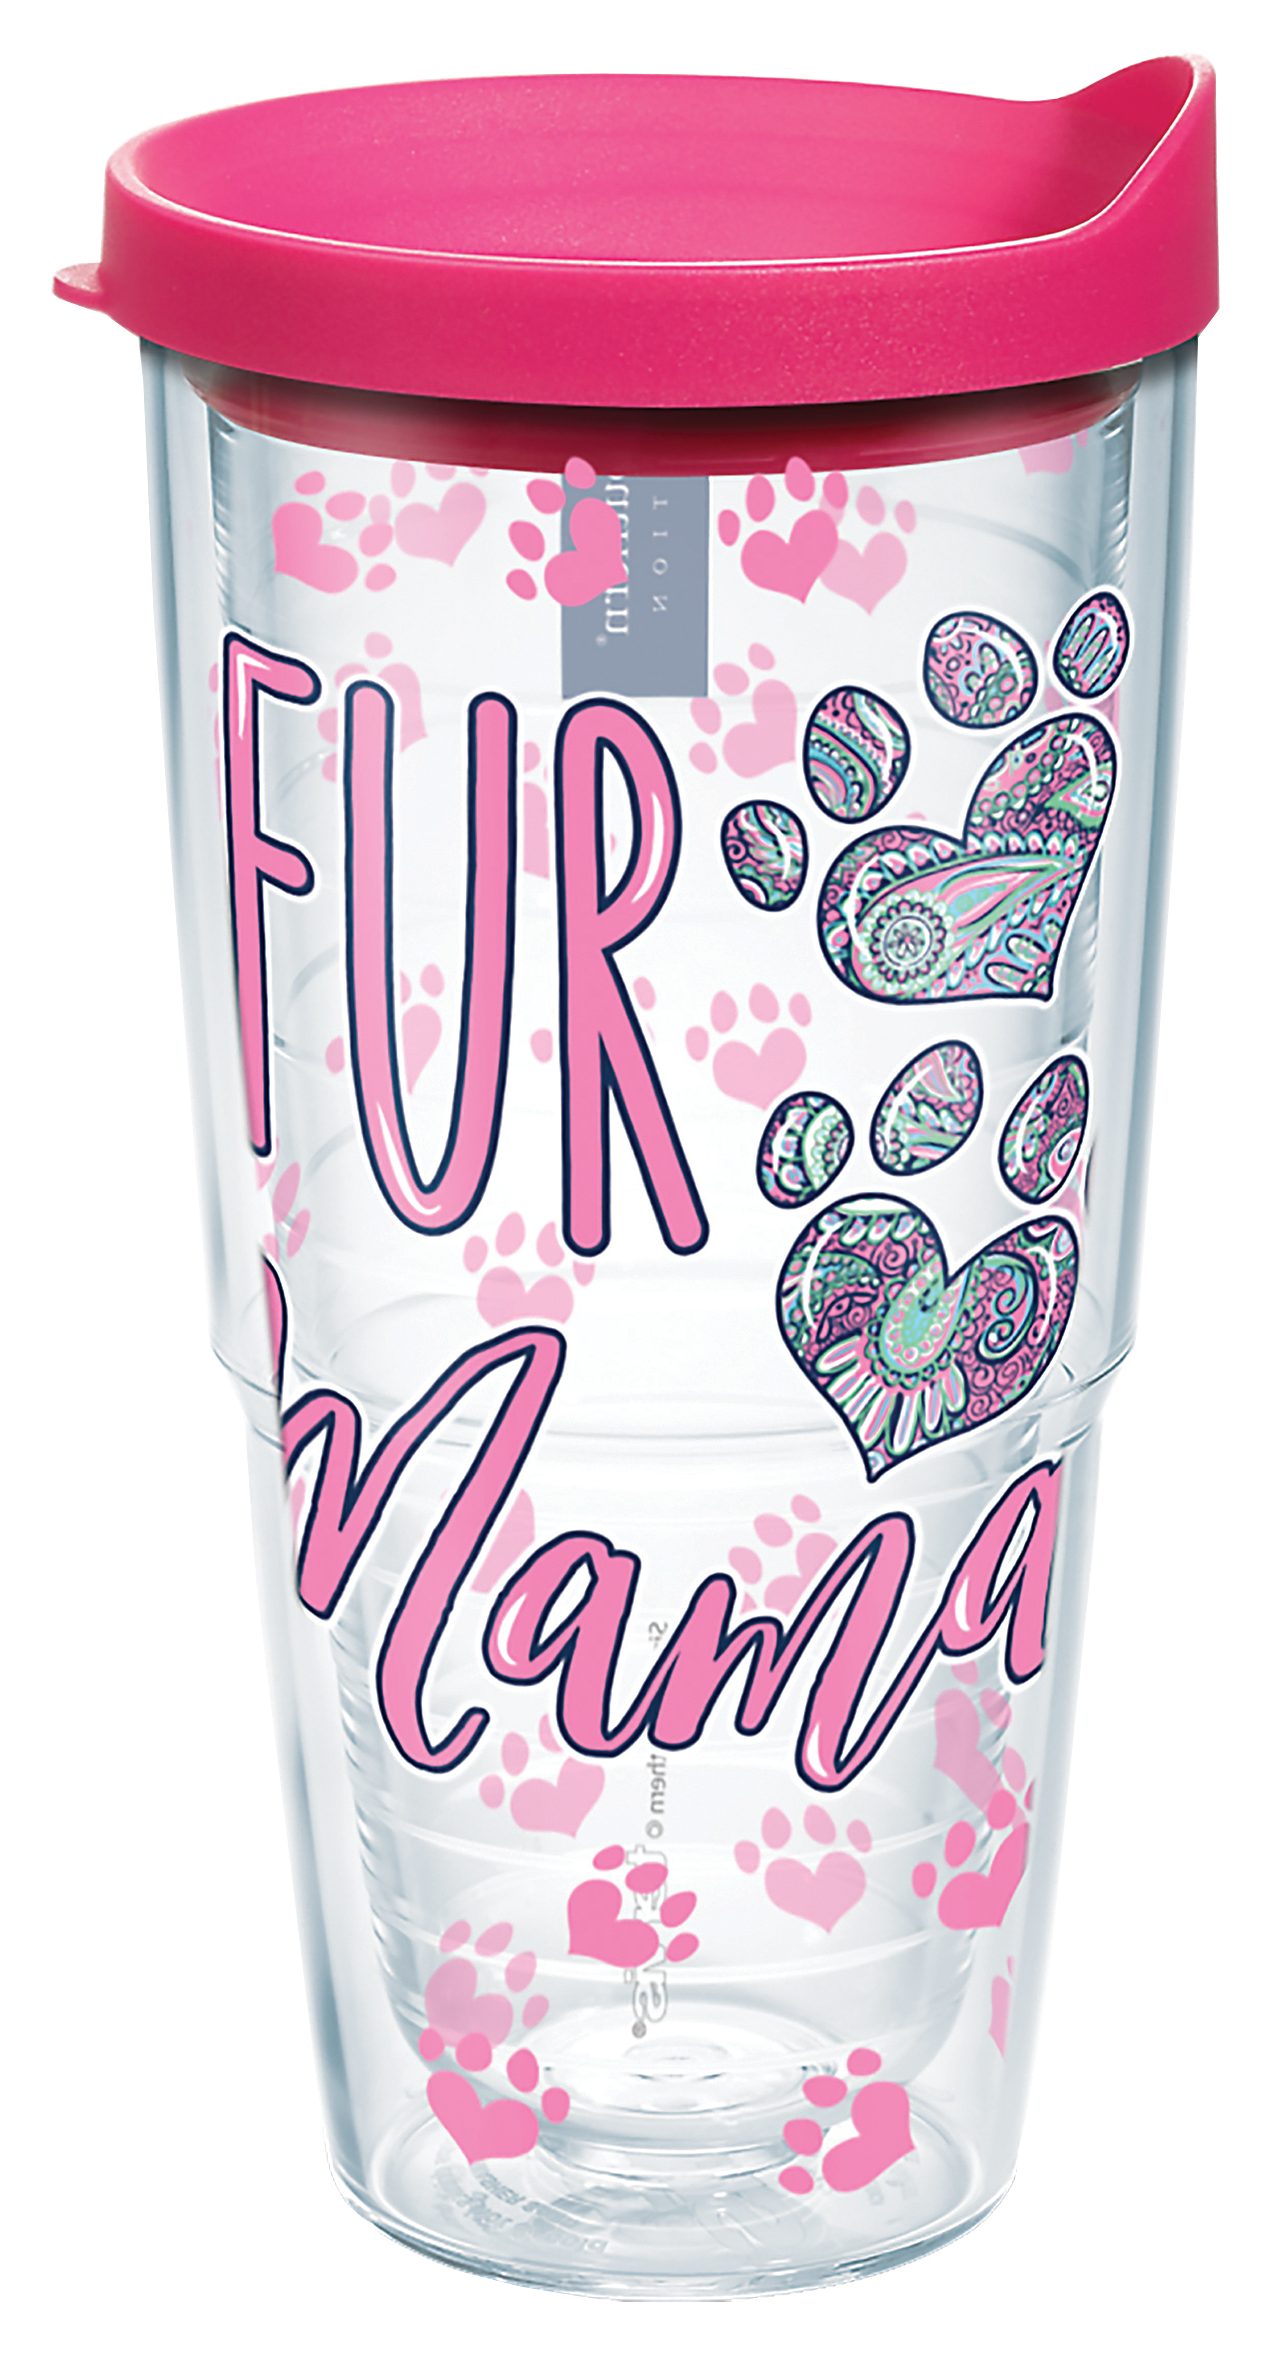 Tervis My Kids Have Paws 20 oz. Stainless Steel Tumbler with Lid